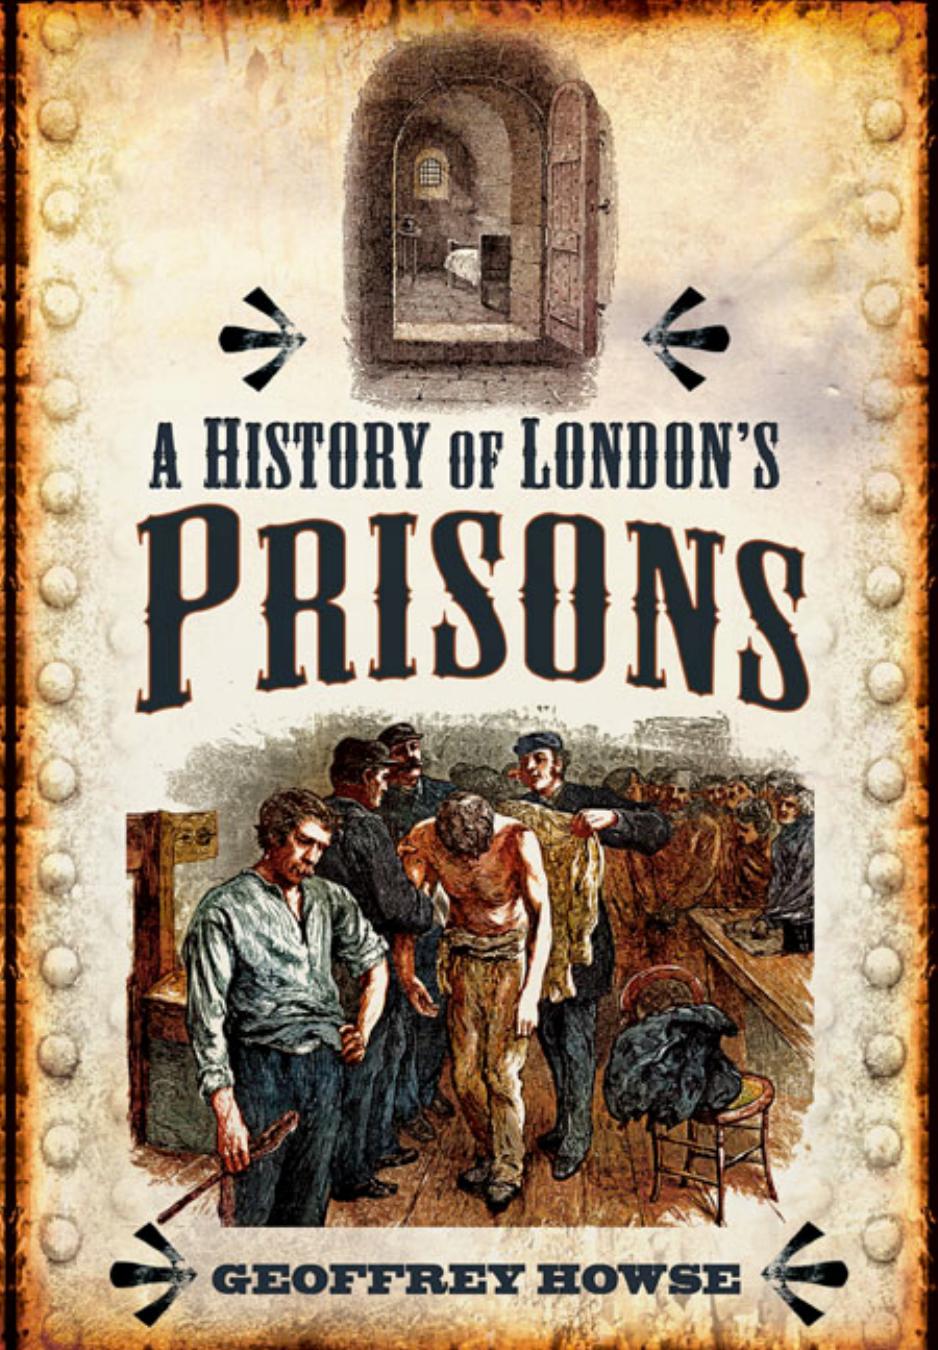 A History of London's Prisons by Geoffrey Howse